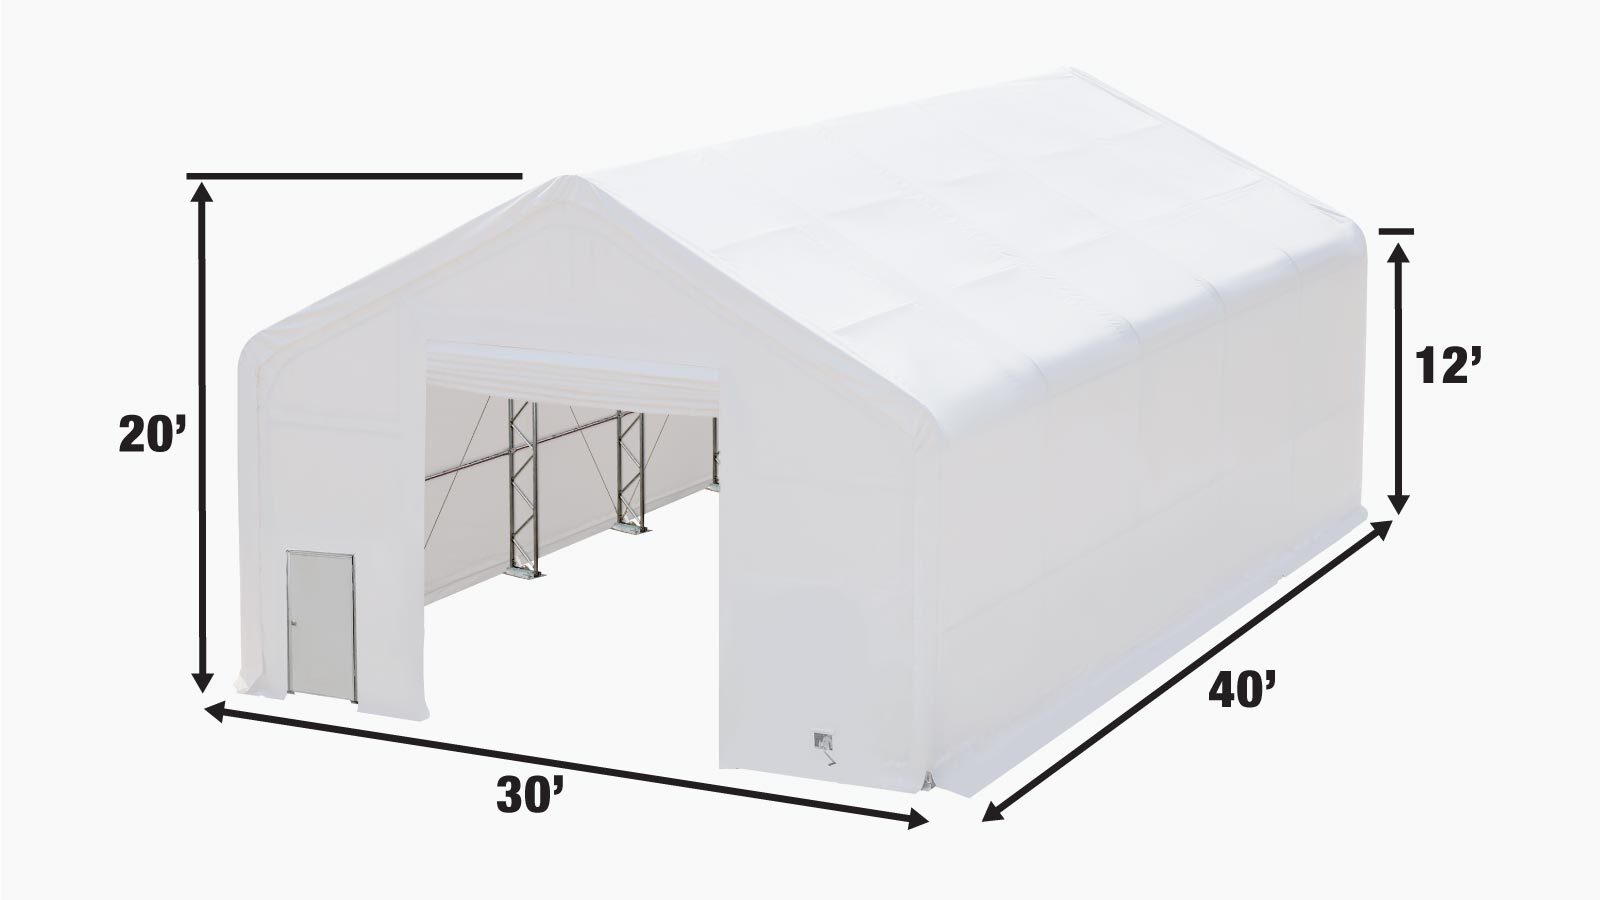 TMG Industrial Pro Series 30' x 40' Dual Truss Storage Shelter with Heavy Duty 17 oz PVC Cover, TMG-DT3041-PRO-specifications-image